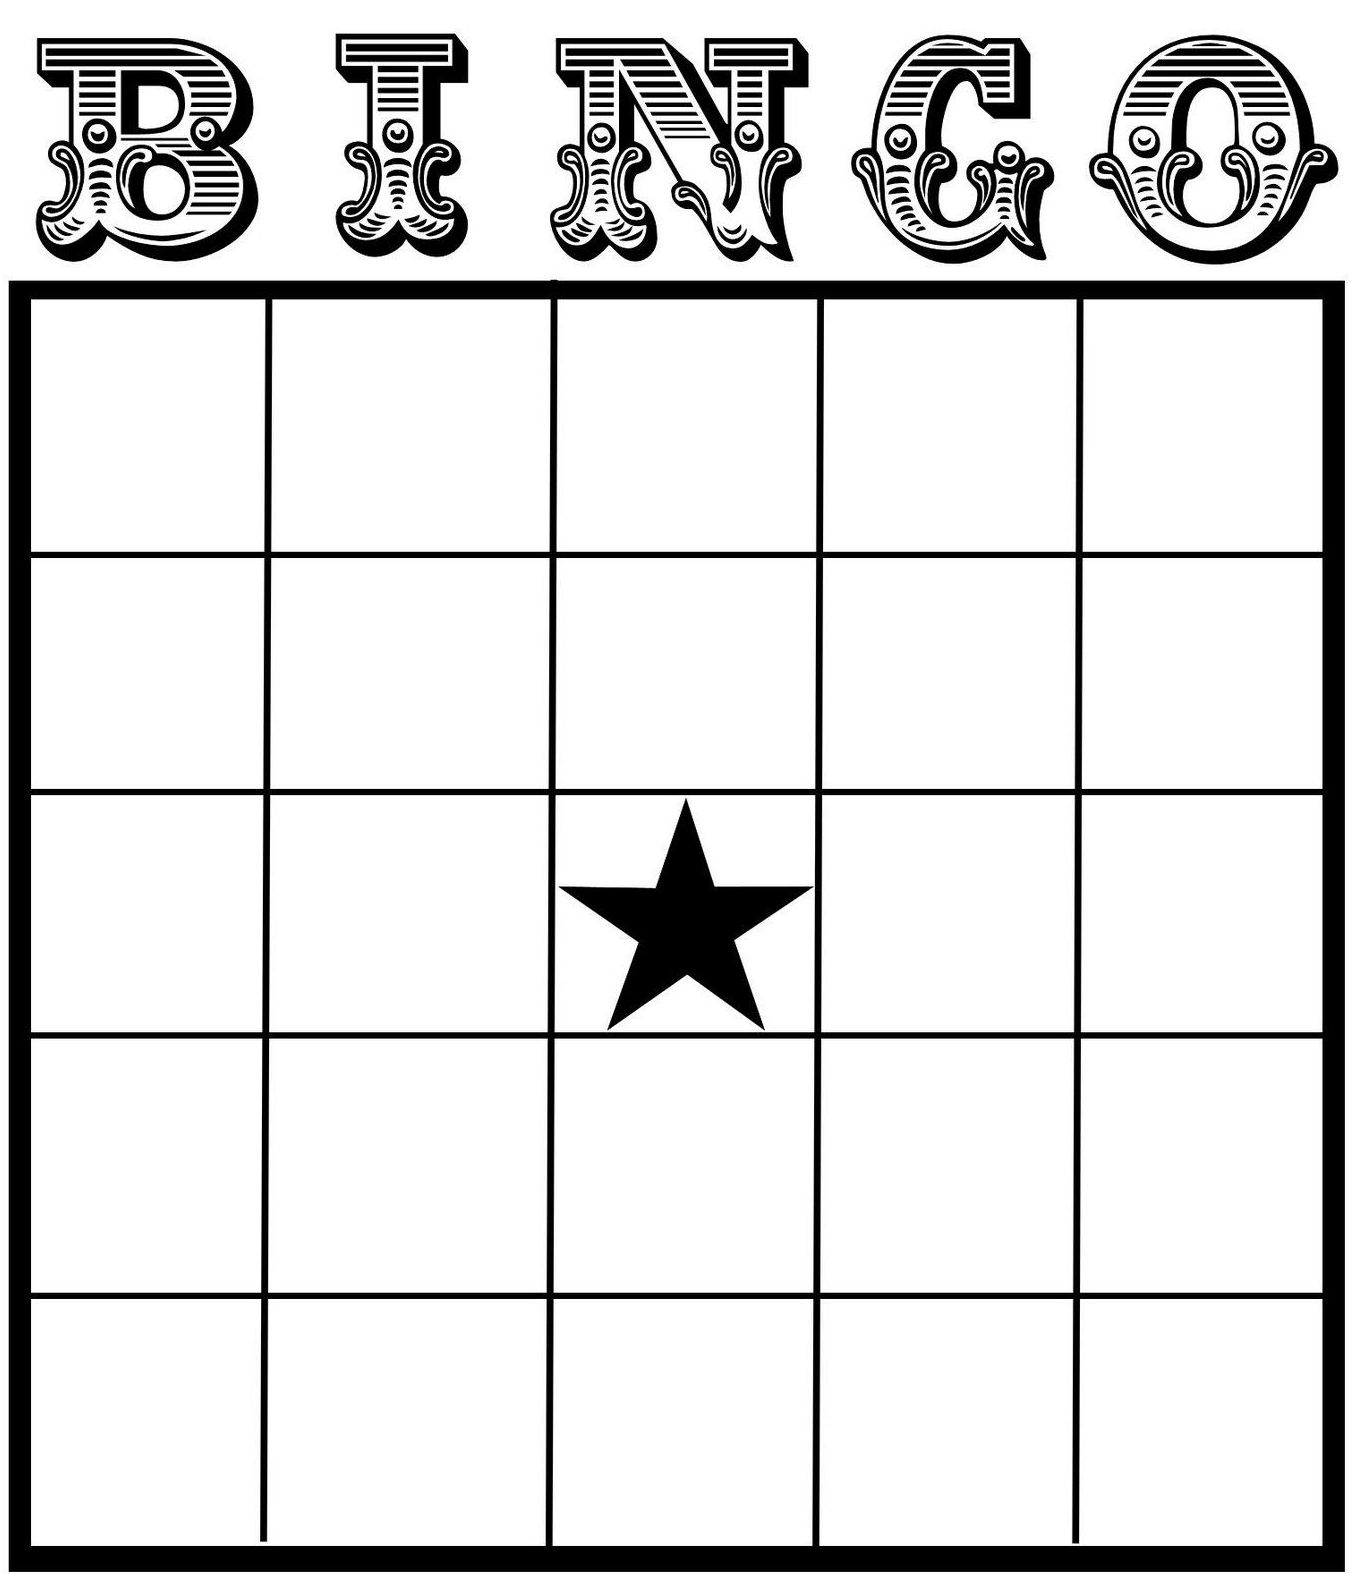 Free Printable Bingo Card Template - Set Your Plan &amp;amp; Tasks With Best - Free Printable Bingo Cards With Numbers